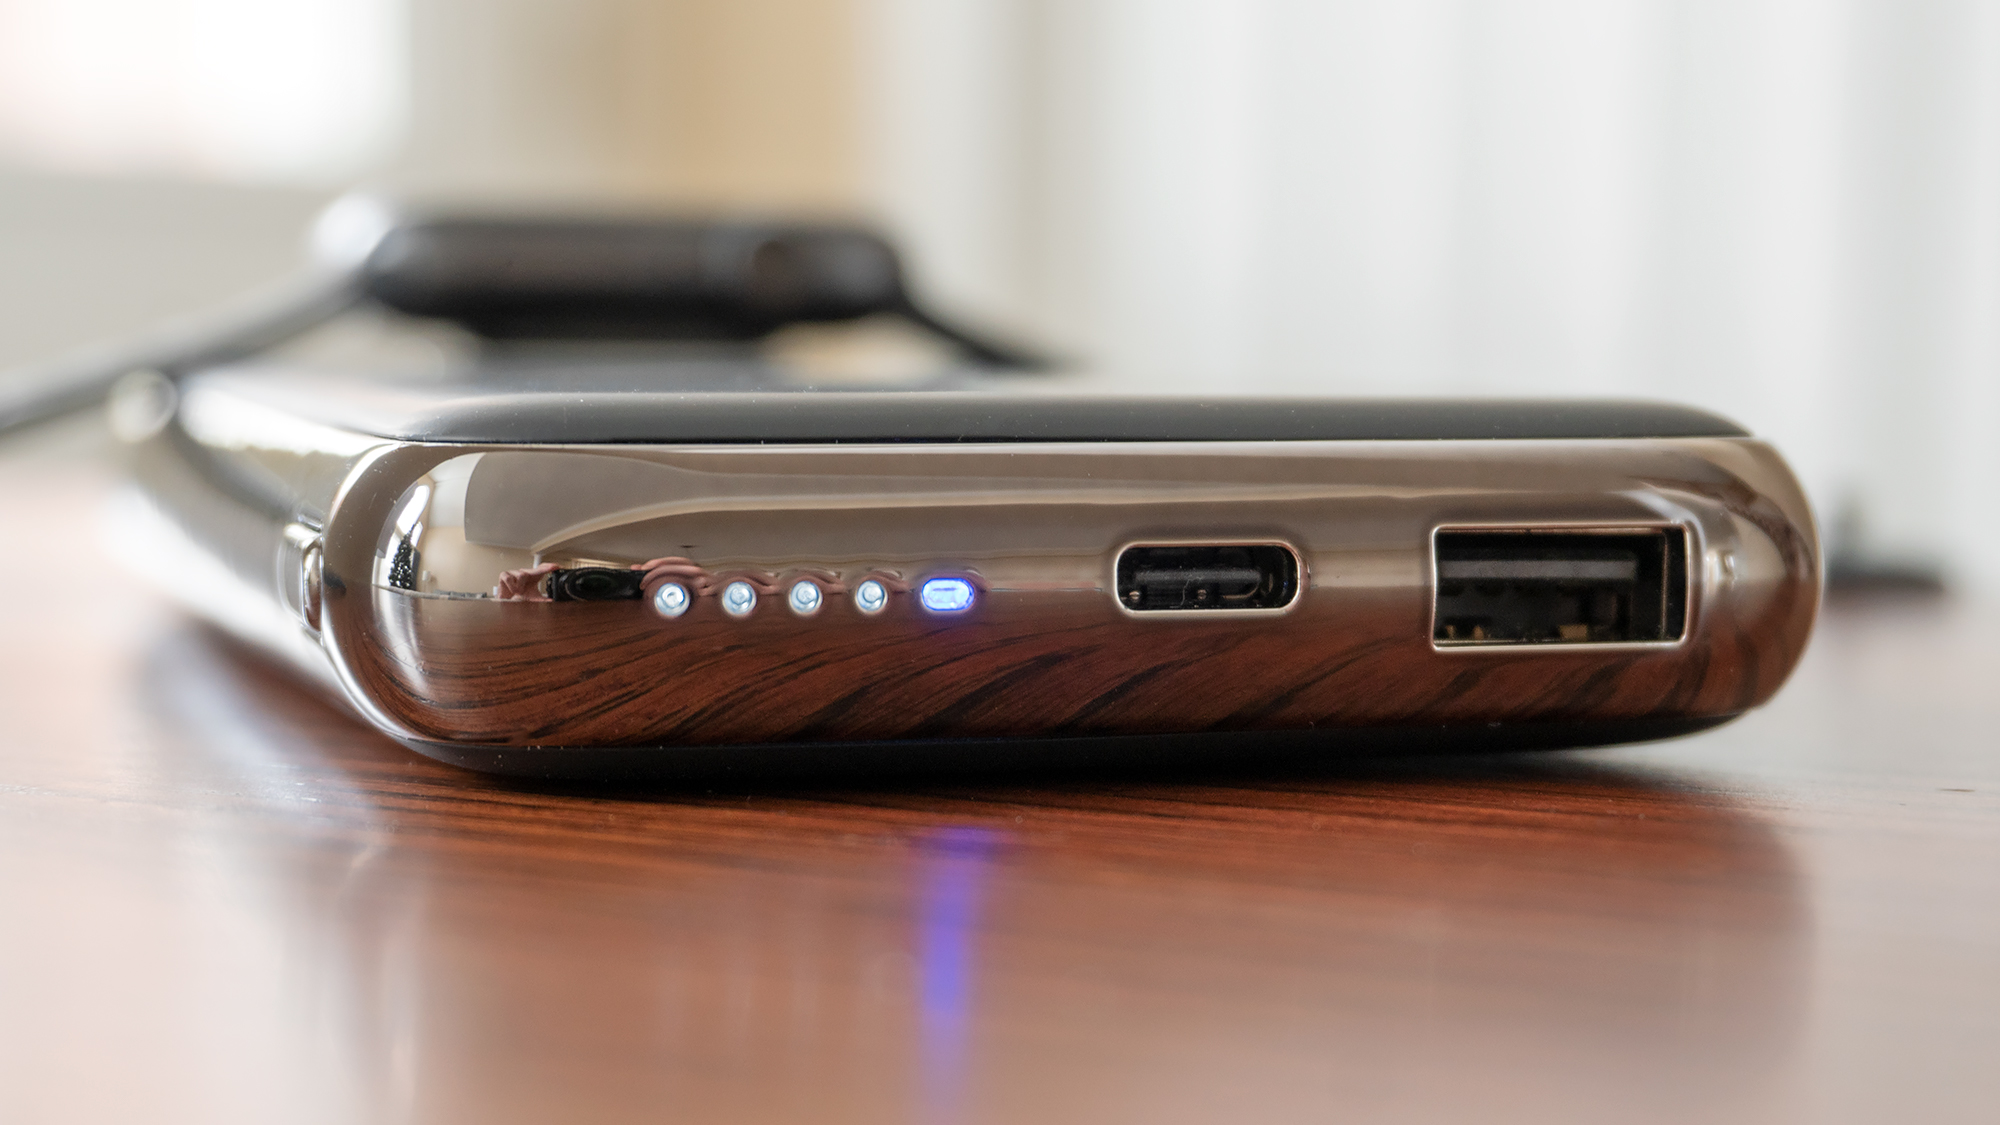 Four LEDs are used to indicate the Quatro's remaining charge level, but for $US100 ($140) a more accurate readout would be nice. (Photo: Andrew Liszewski/Gizmodo)